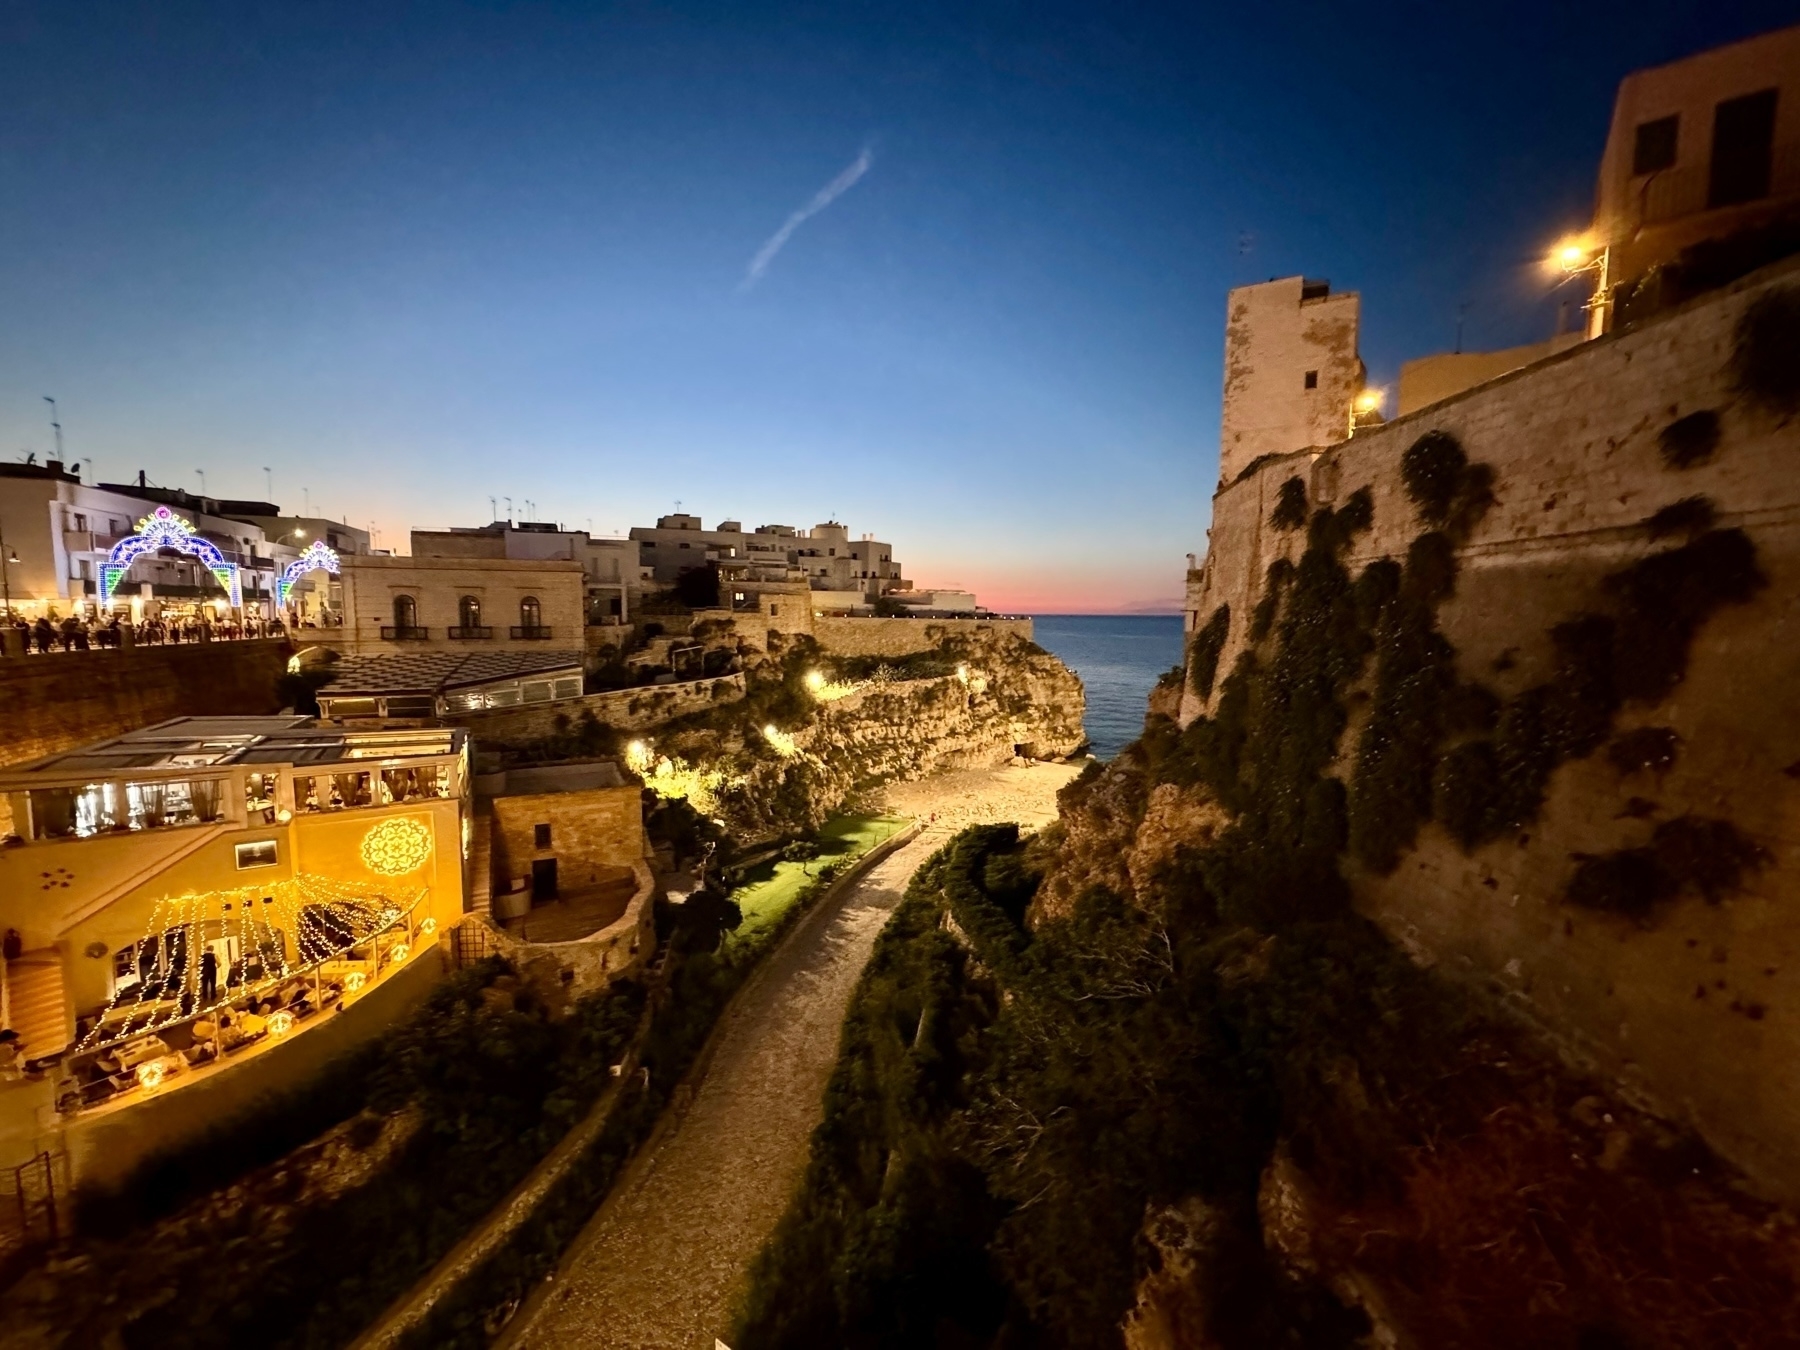 Dusk view of a coastal town featuring illuminated buildings, a lit pathway, and a rocky cove leading to the sea. The sky is a gradient from dark blue to a faint orange horizon, and the architecture showcases a blend of modern and old structures. 